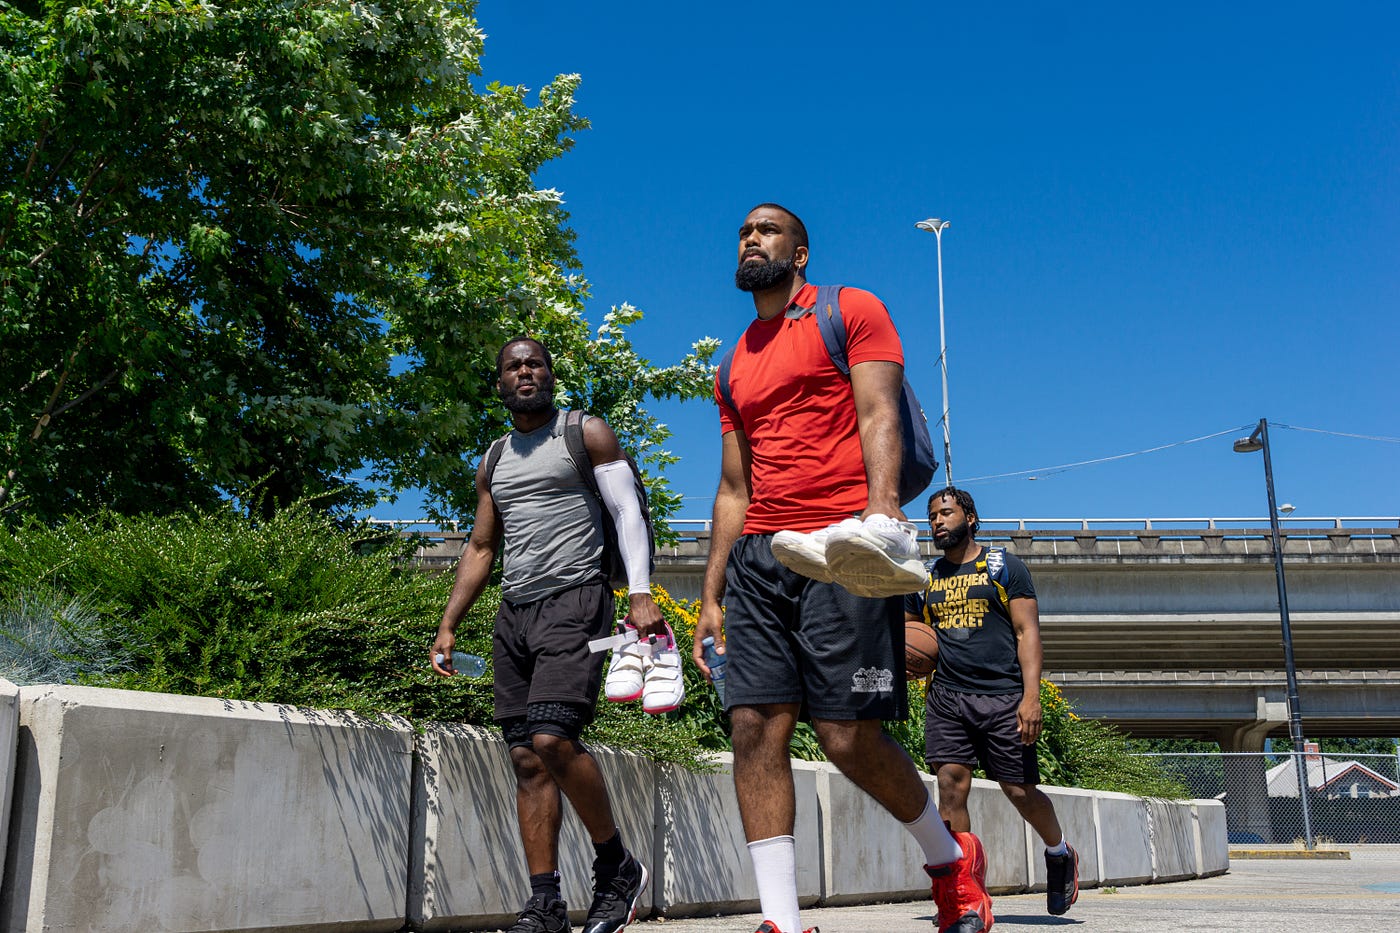 Three black men walking down the sidewalk with basketball shoes in their hands.